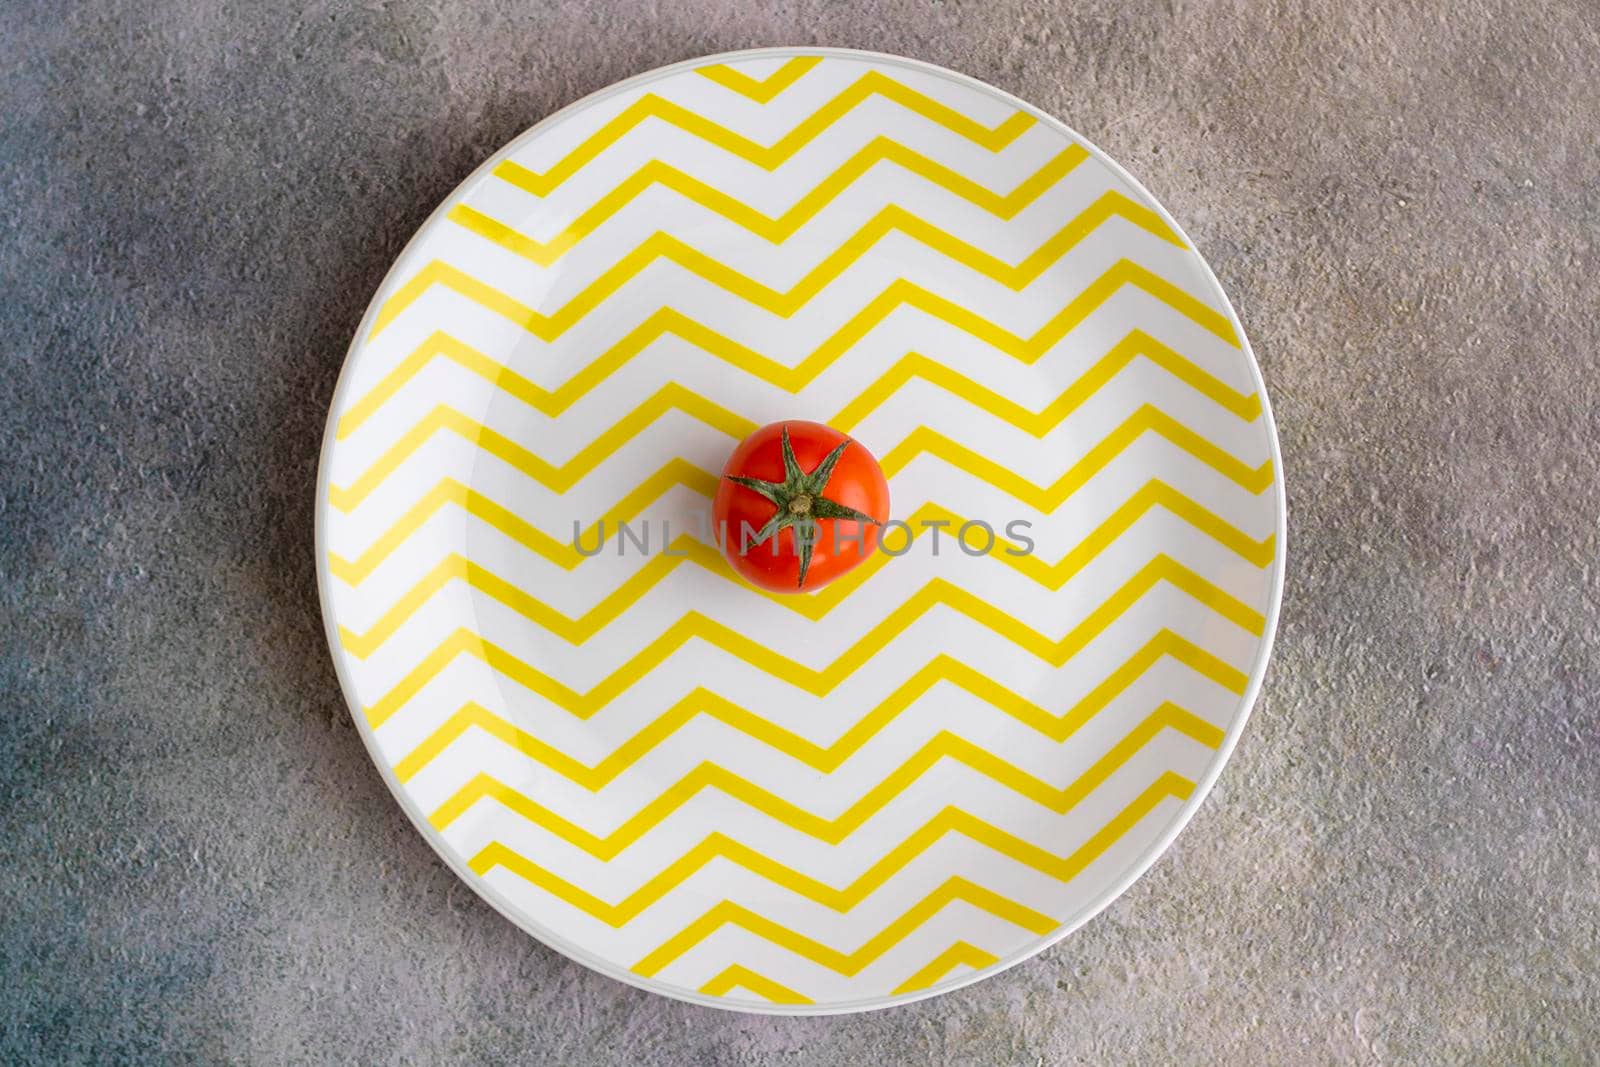 Cherry tomatoes on yellow striped plate by eagg13